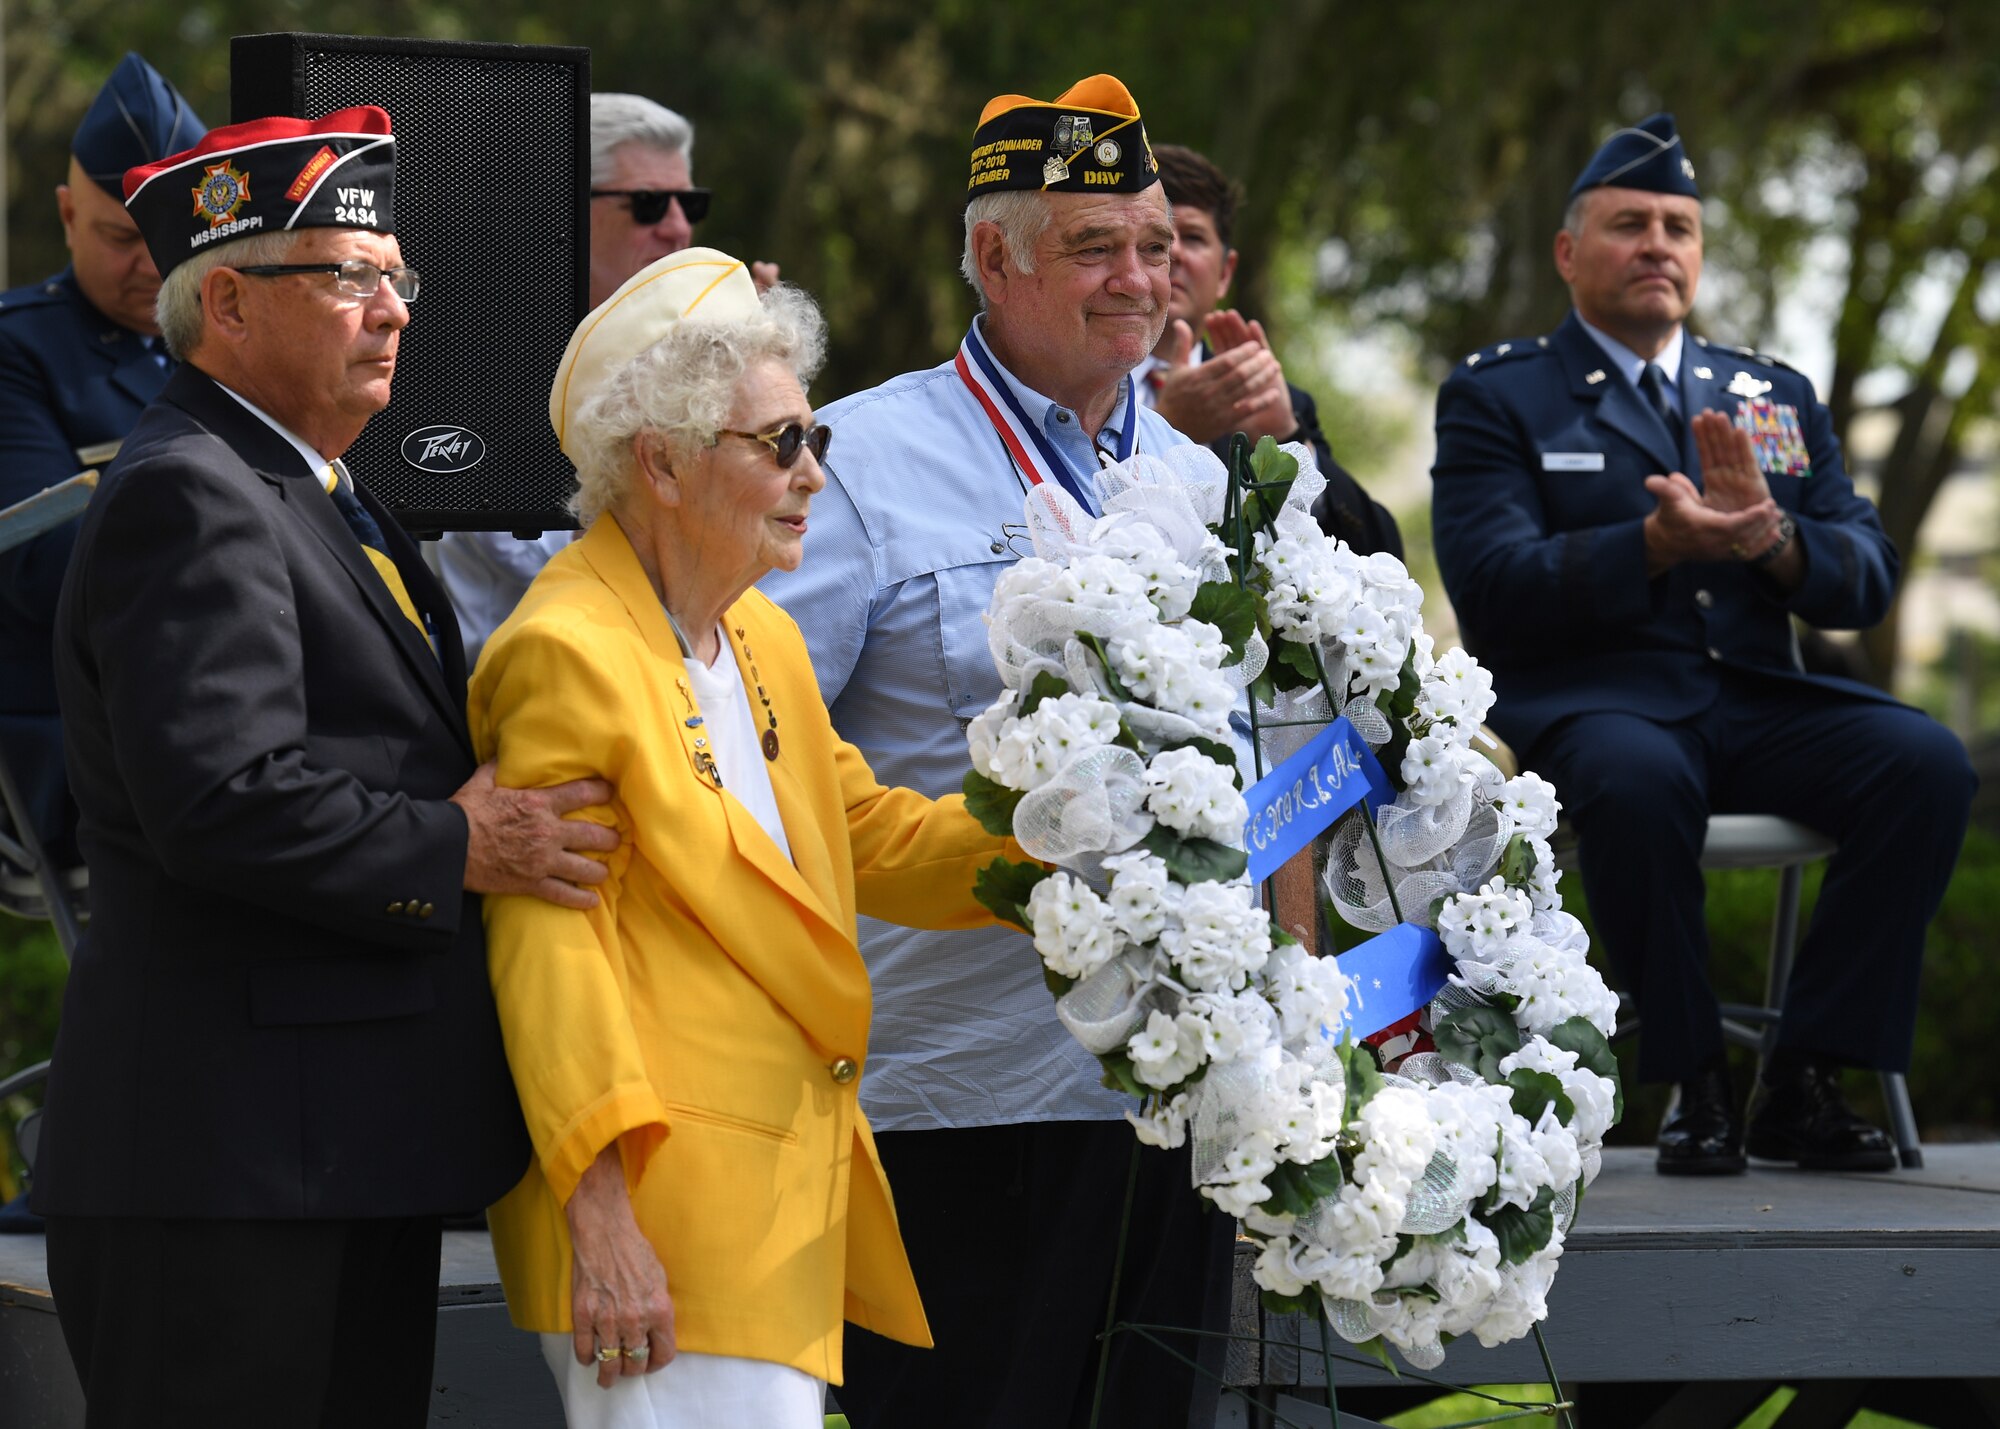 Emily Crower, spouse of retired U.S. Army Maj. Albert Crower, presents a wreath on behalf of the Gold Star Wives organization during the Biloxi National Cemetery Memorial Day Ceremony in Biloxi, Mississippi, May 27, 2019. The ceremony honored those who have made the ultimate sacrifice while serving in the armed forces. Biloxi National Cemetery is the final resting place of more than 23,000 veterans and their family members. Eight hundred burials take place there every year for men and women who served in wars years ago and for those defending America today. (U.S. Air Force photo by Kemberly Groue)